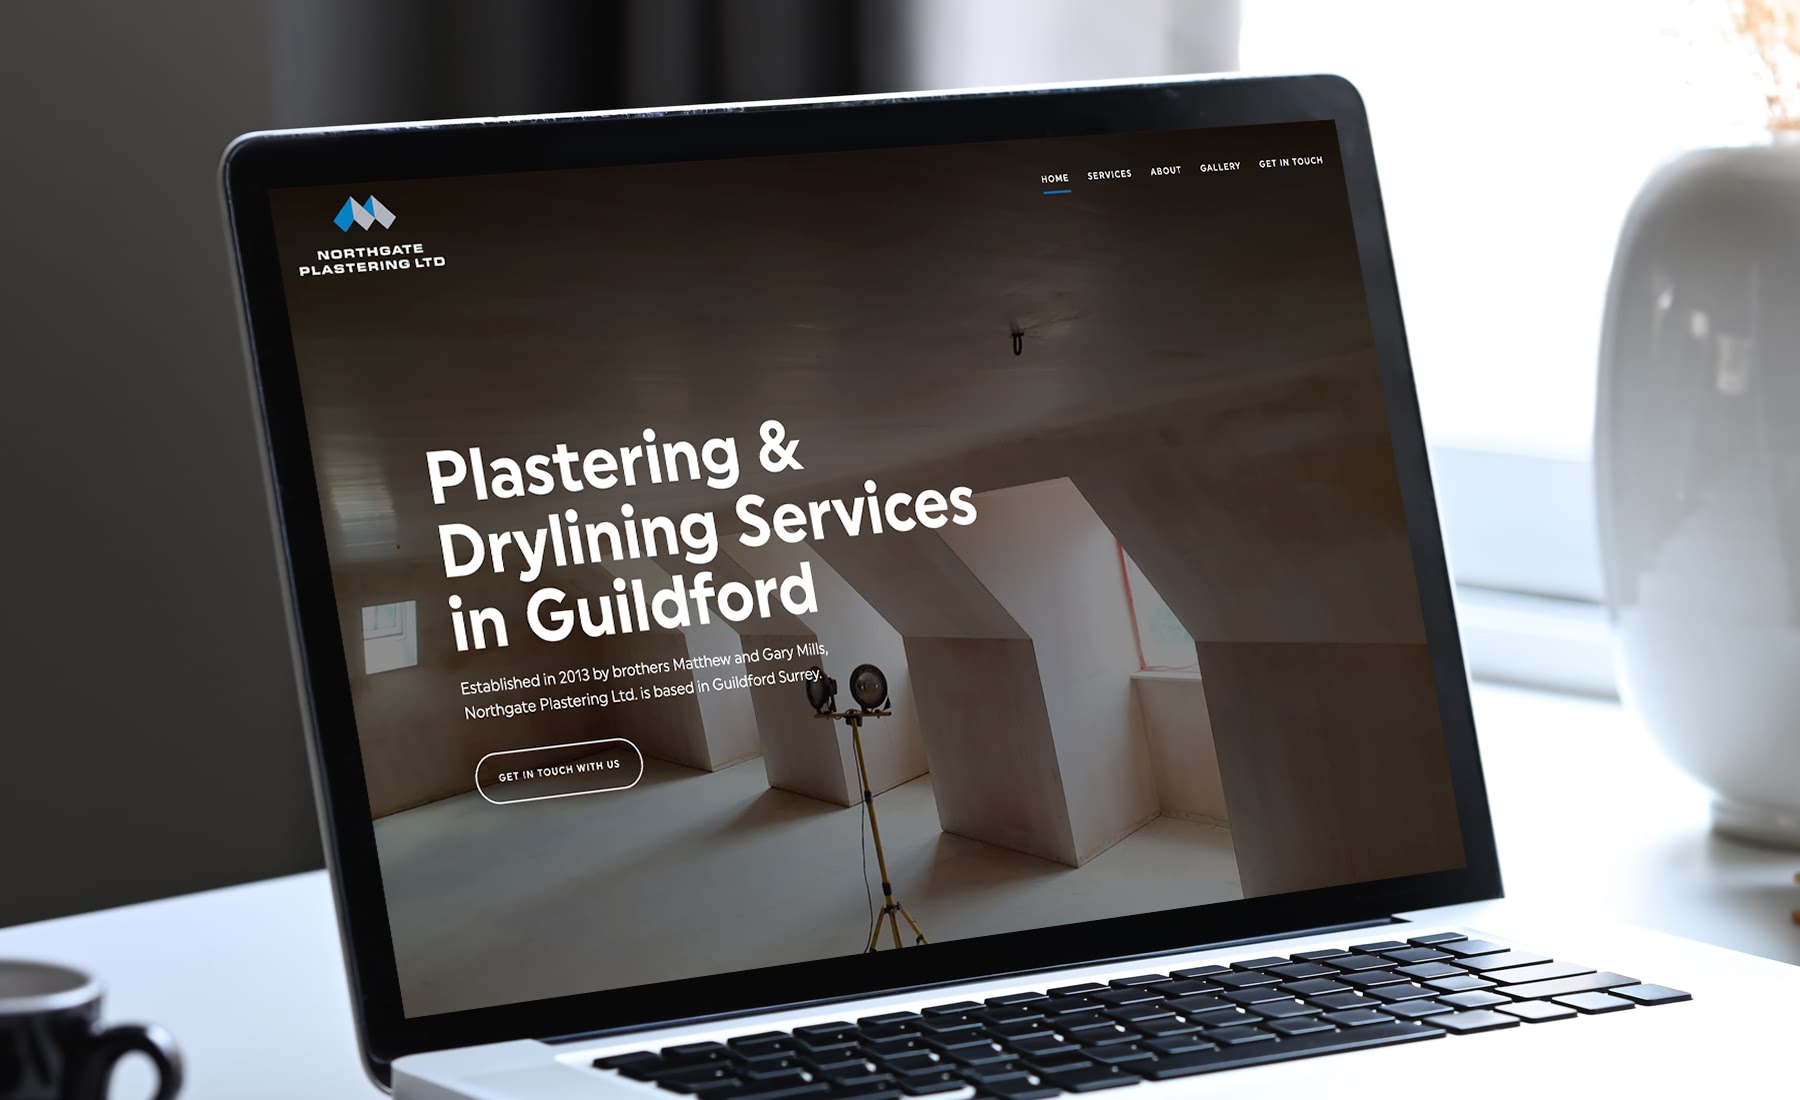 Plastering Services One Page Website